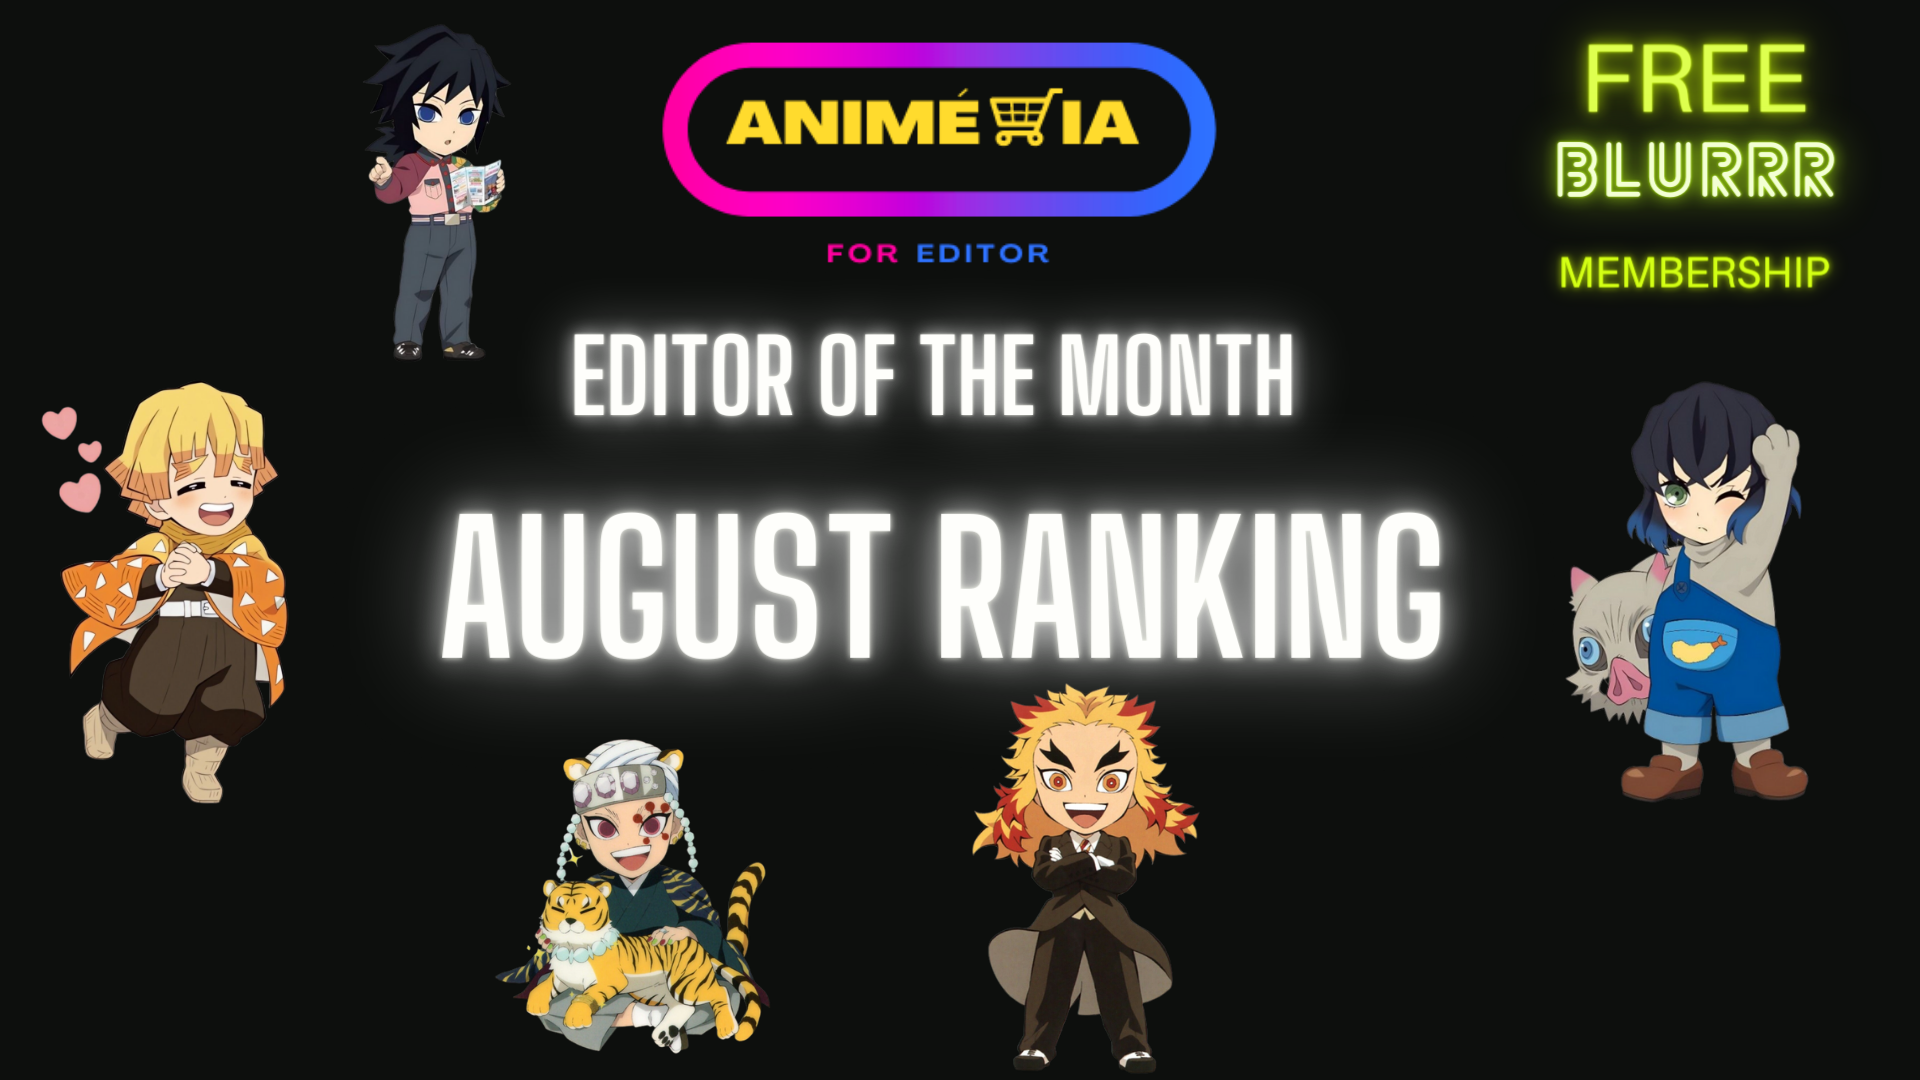 August Ranking “Editor of The Month”